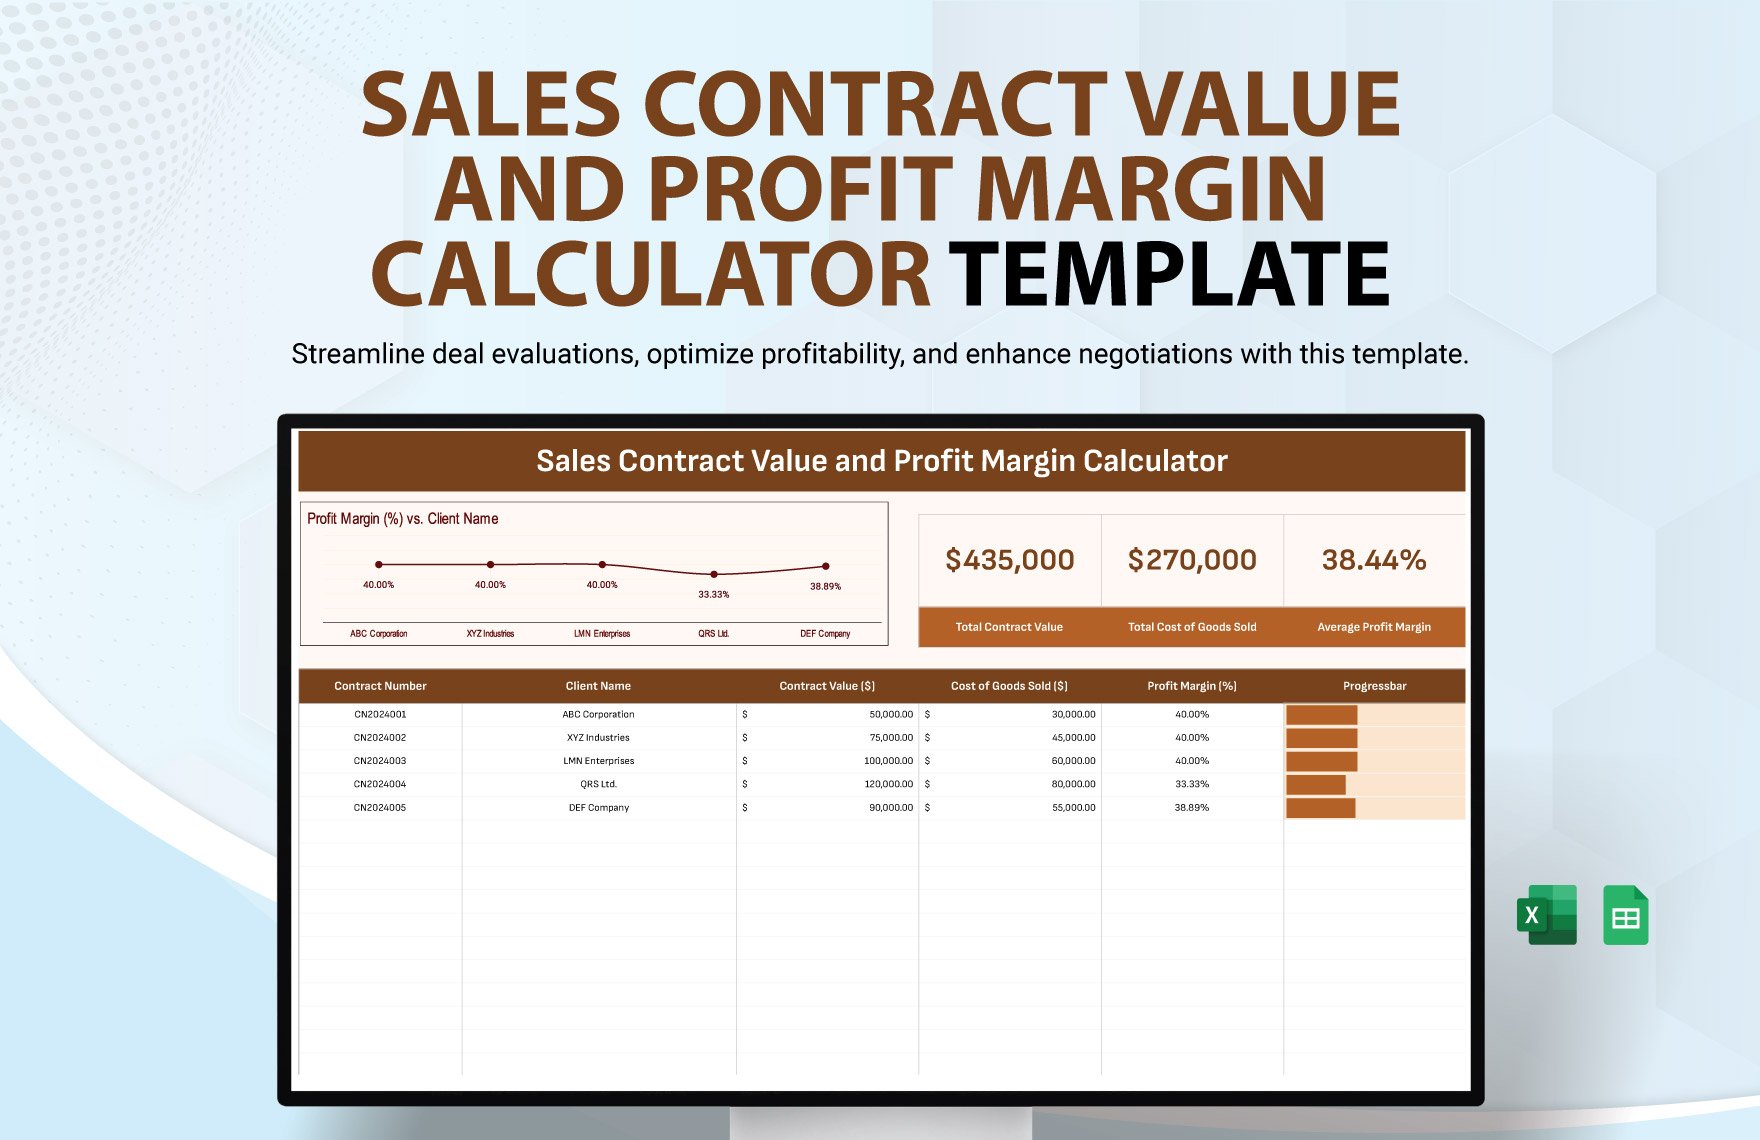 Sales Contract Value and Profit Margin Calculator Template